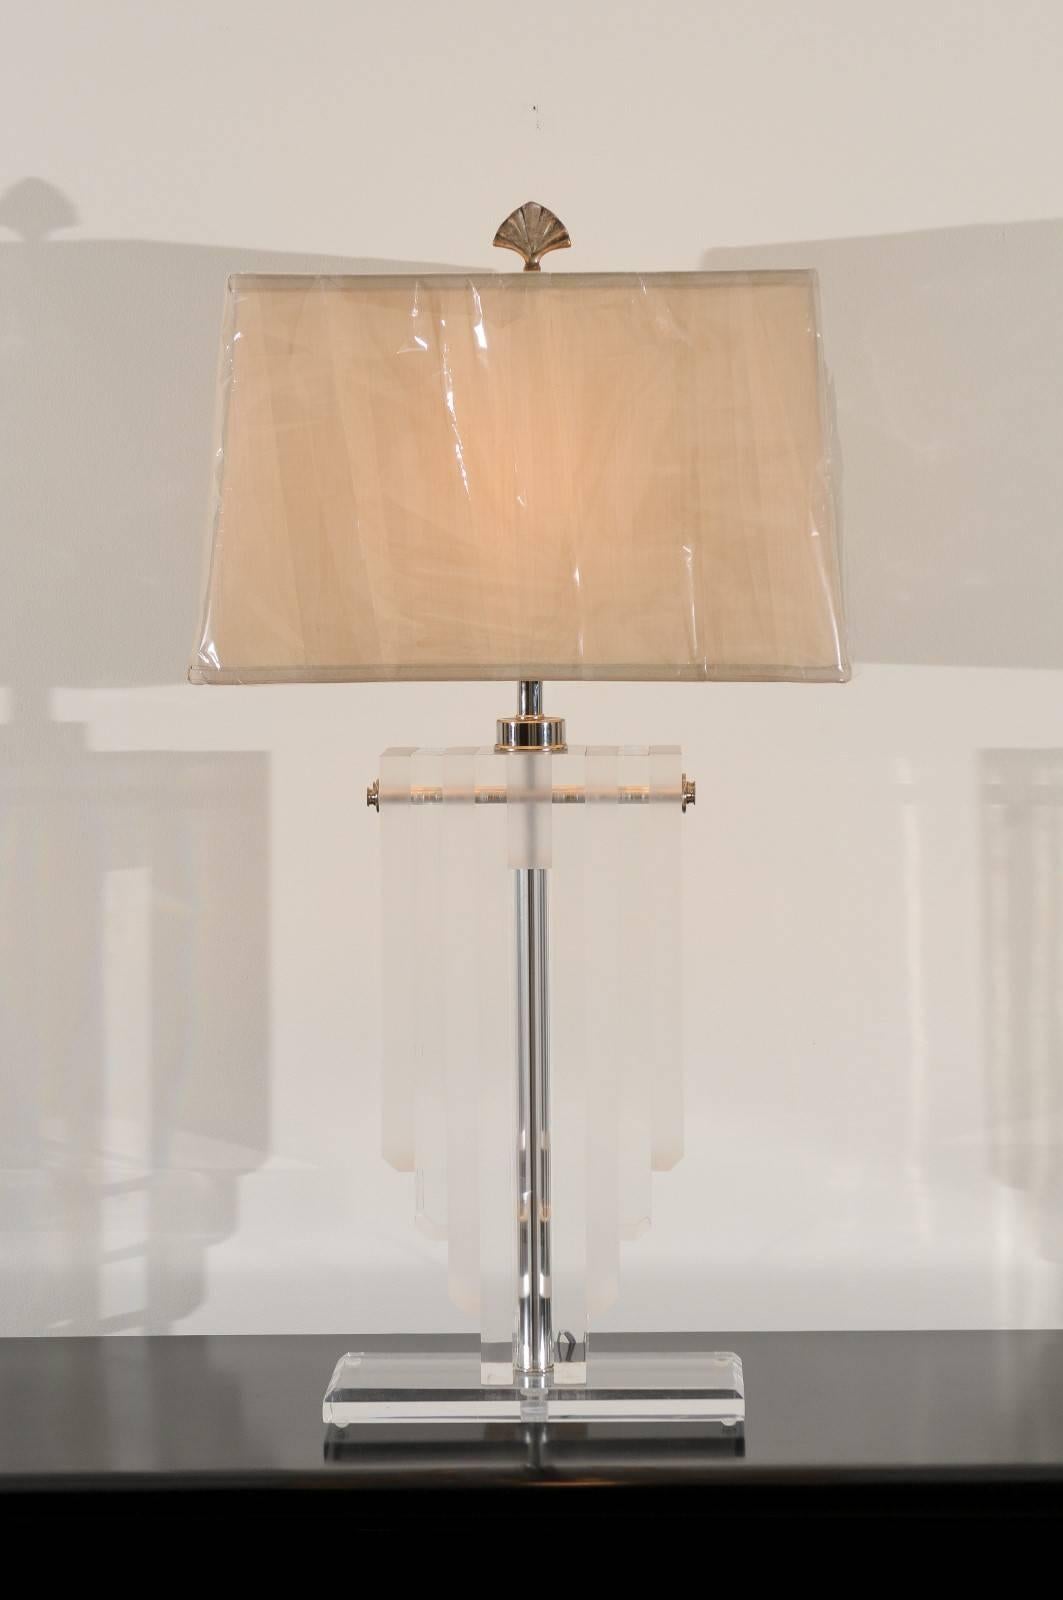 A stunning pair of vintage lamps, circa 1970. Thick Lucite slabs arranged in a dramatic shield form with nickel accents, atop a Lucite base. Heavy, beautifully crafted pieces. Exceptional jewelry! Excellent restored condition. Rewired using clear